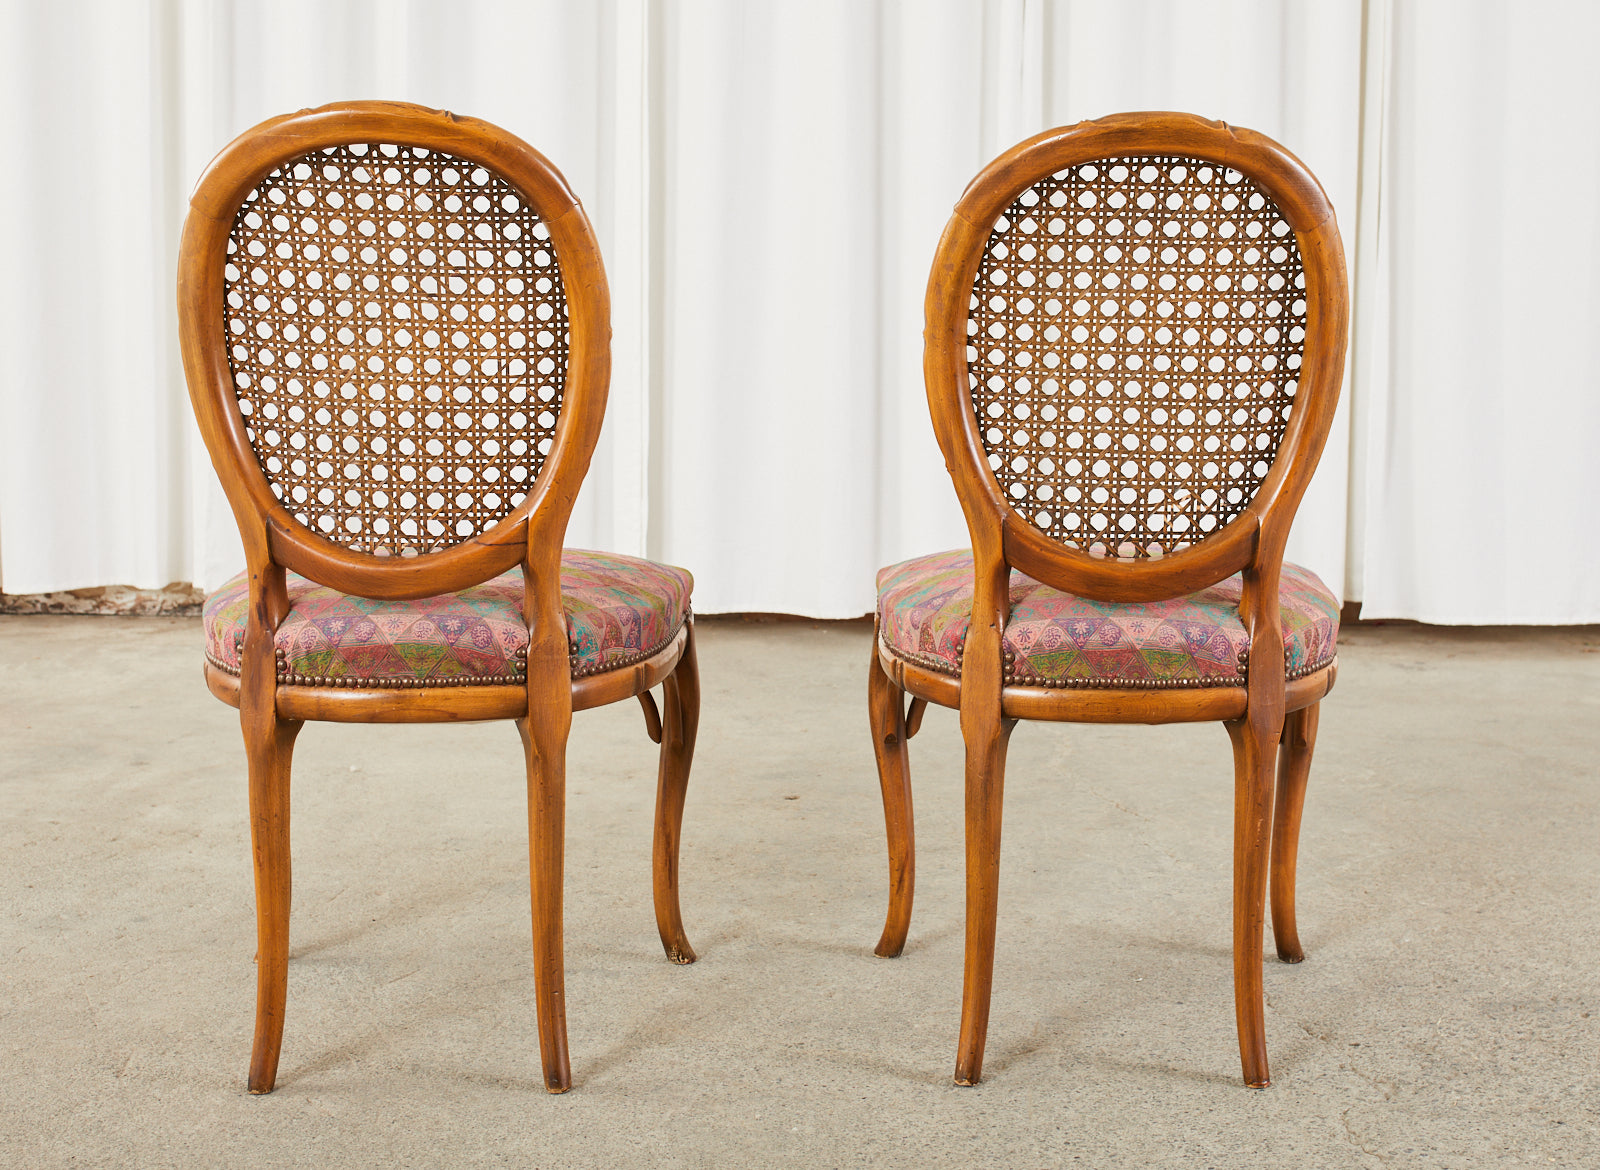 Pair of Mid-Century Faux Bamboo and Cane Dining Chairs